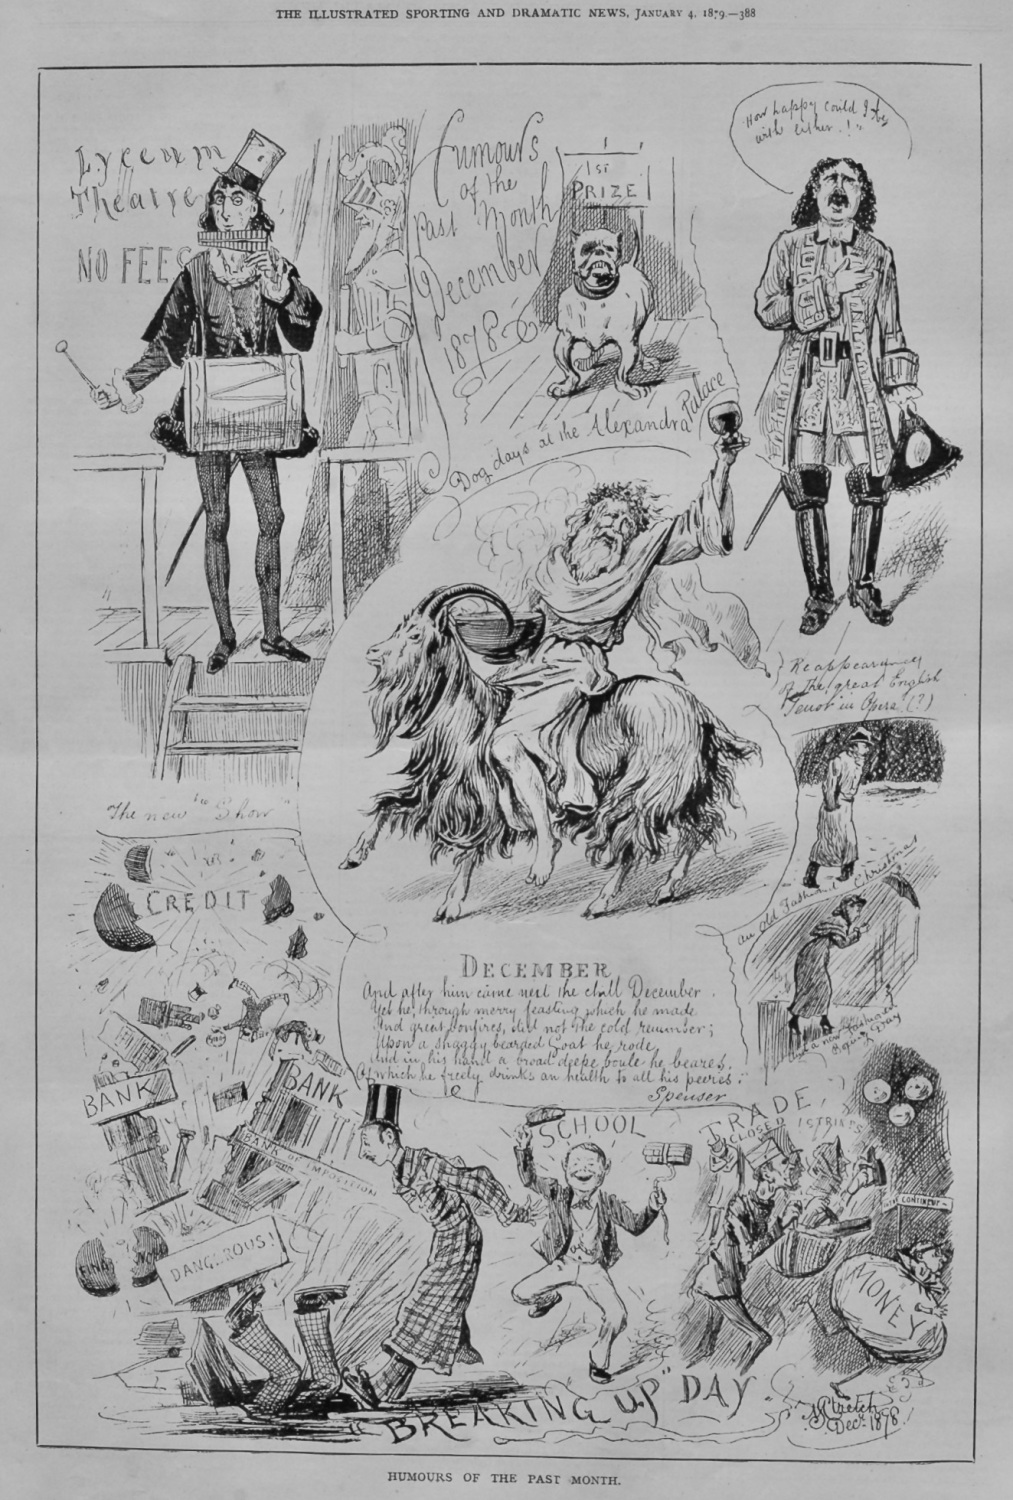 Humours of the Past Month December 1878.